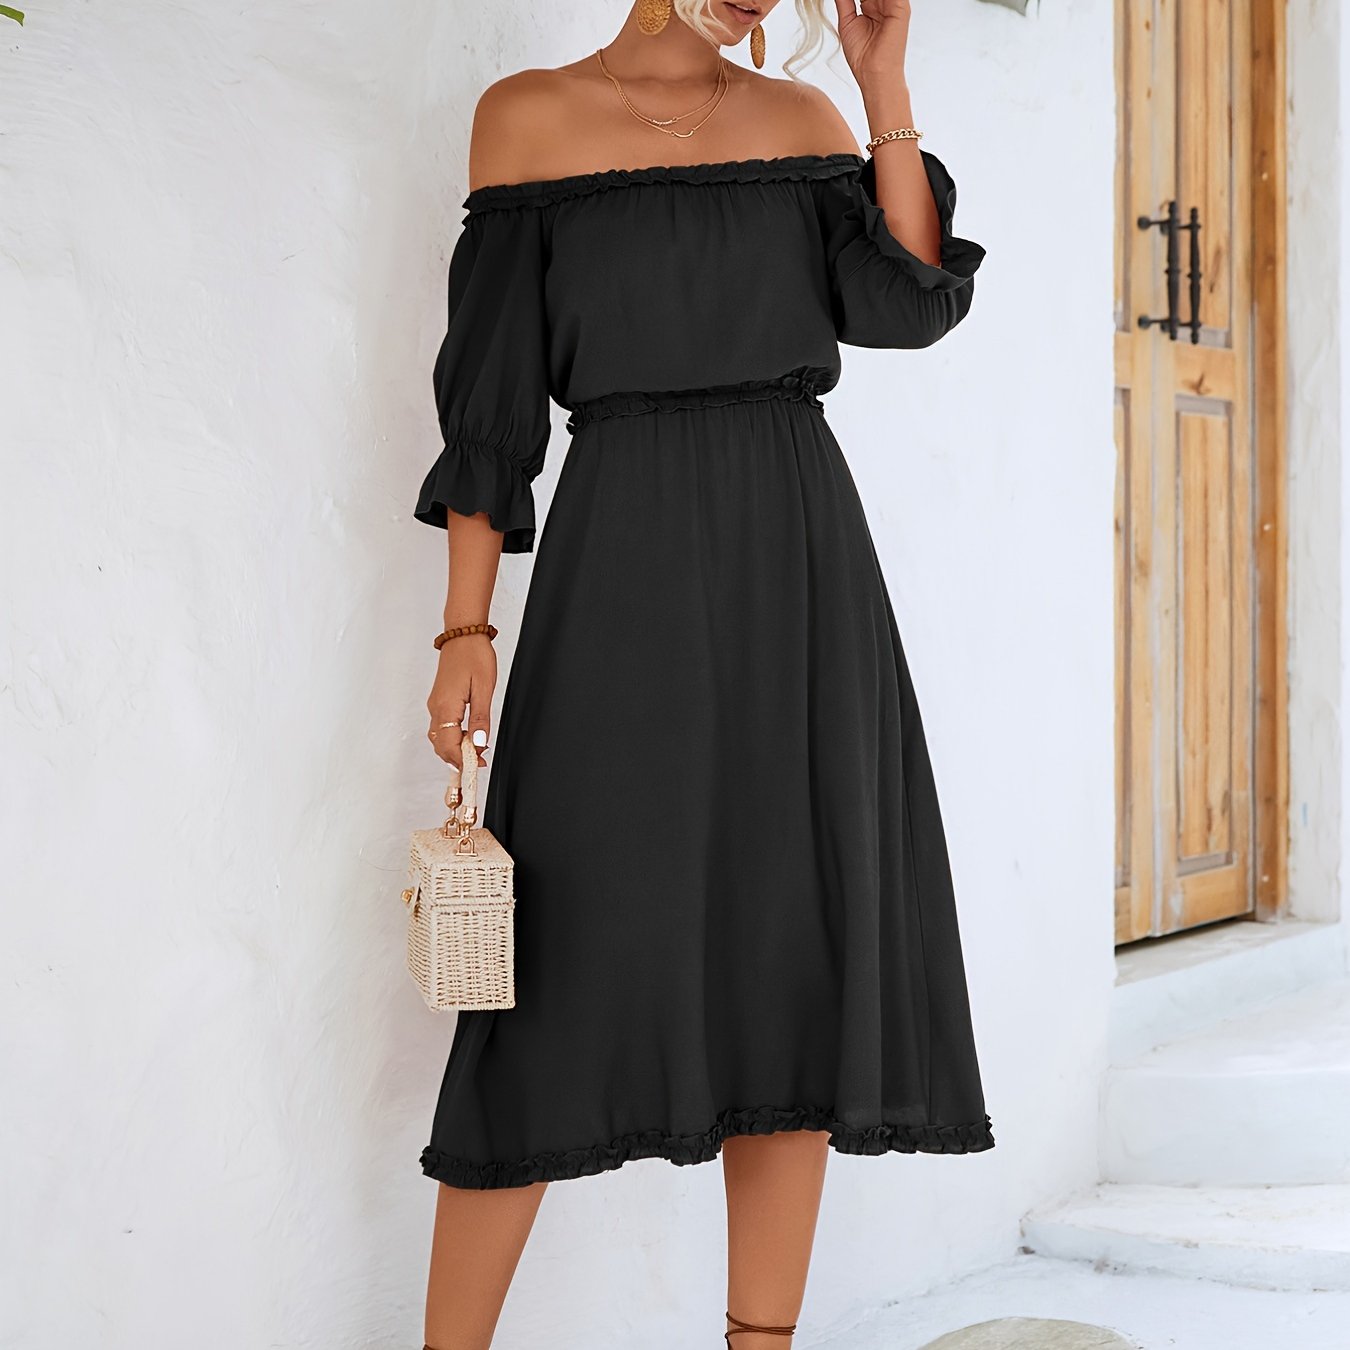 Ruffle Hem Off Shoulder Dress, Solid Short Sleeve Dress, Casual Every Day Dress, Women's Clothing AE1016